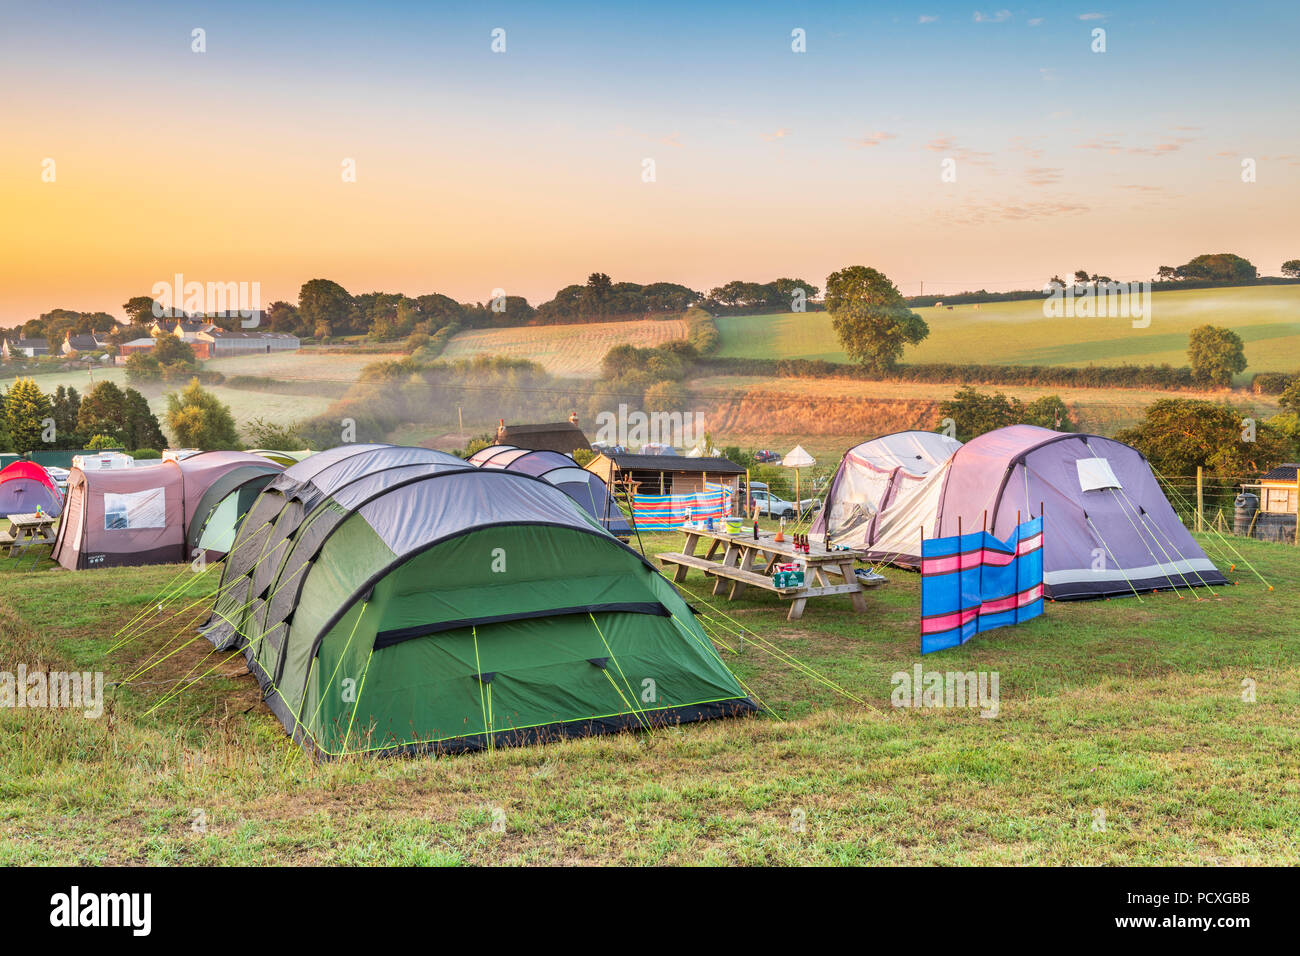 Devon, UK. 5 August 2018.  After a mild cool night, the early morning mist clears as the sun rises over the picturesque little campsite of Broad Park near Bideford in North Devon. Credit: Terry Mathews/Alamy Live News Stock Photo